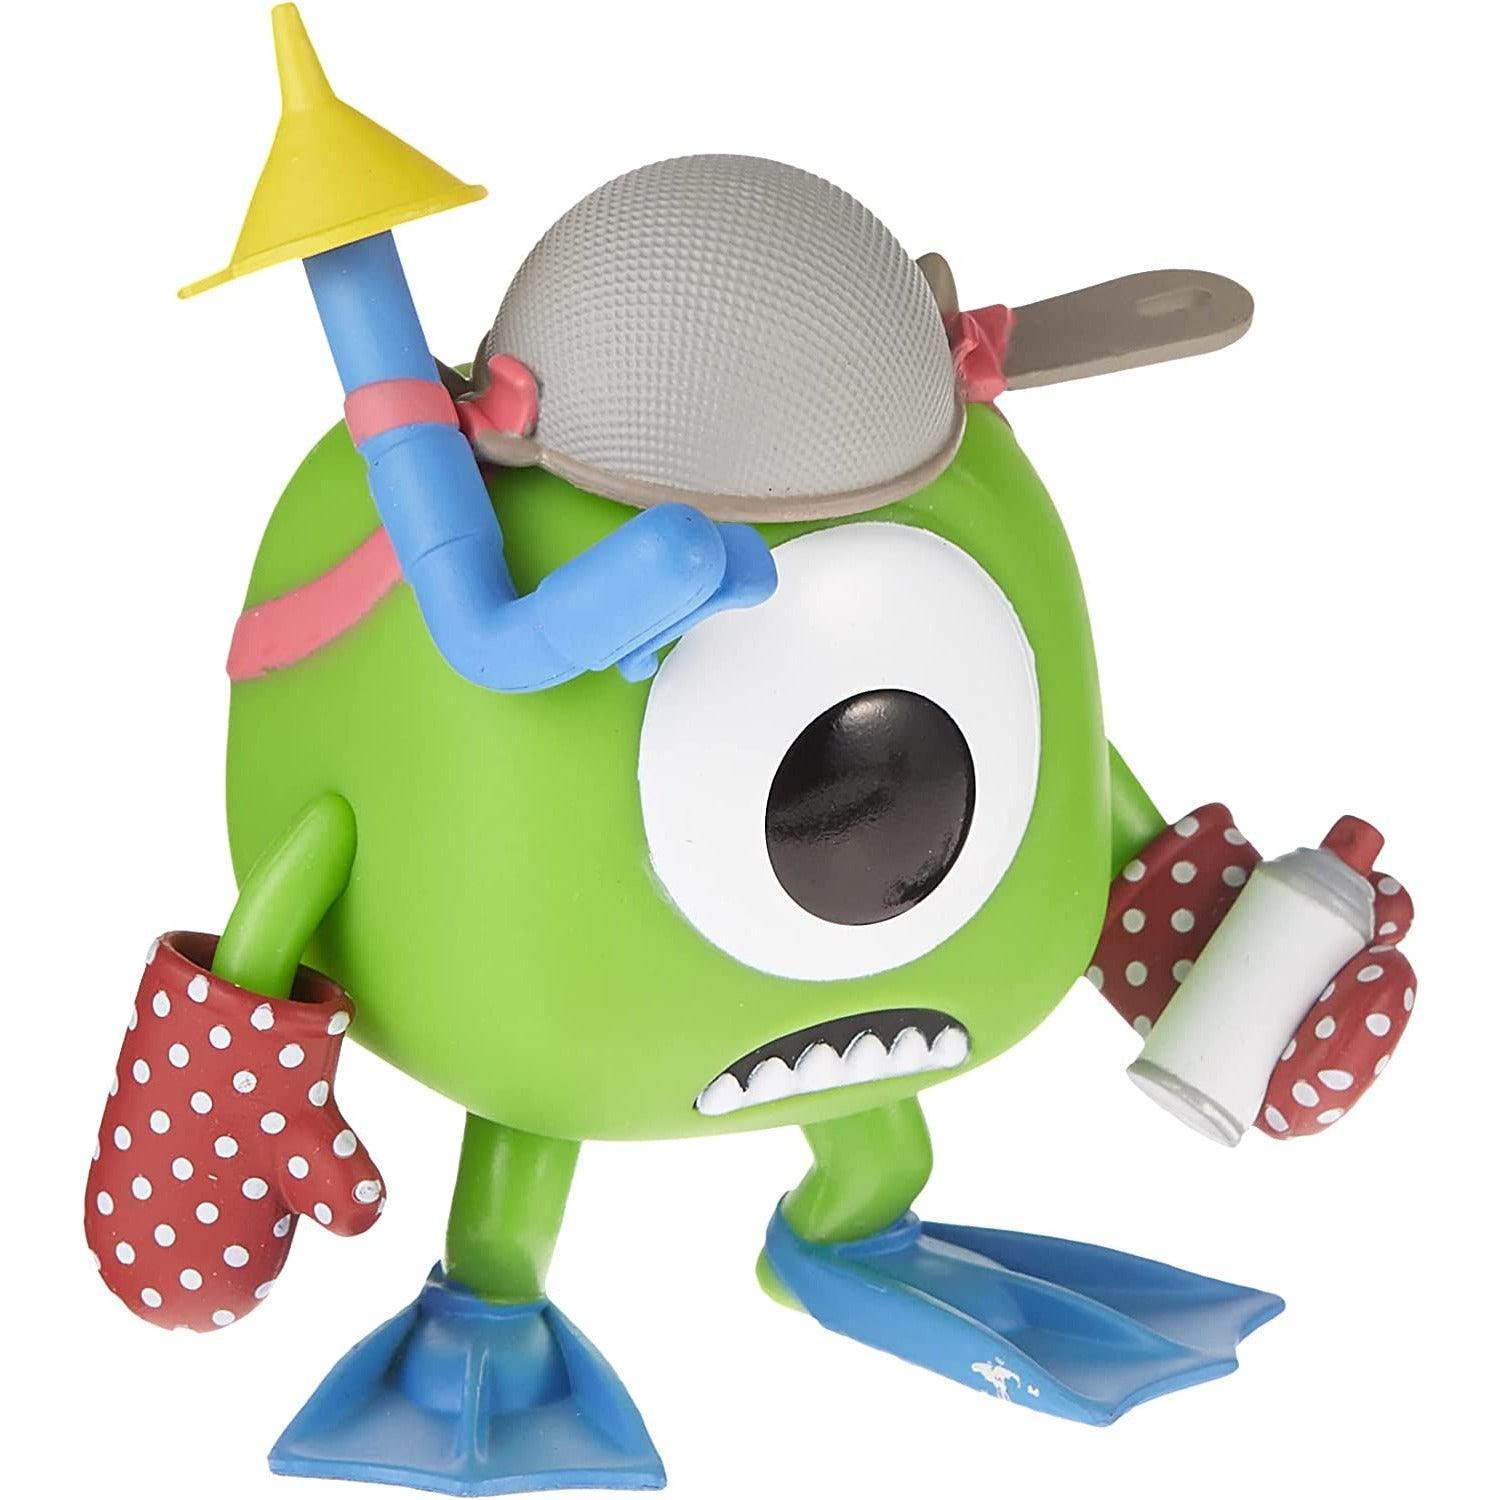 Funko Pop! Disney Monsters Inc - Mike With Mitts - BumbleToys - 18+, 5-7 Years, Boys, Fashion Dolls & Accessories, Funko, Girls